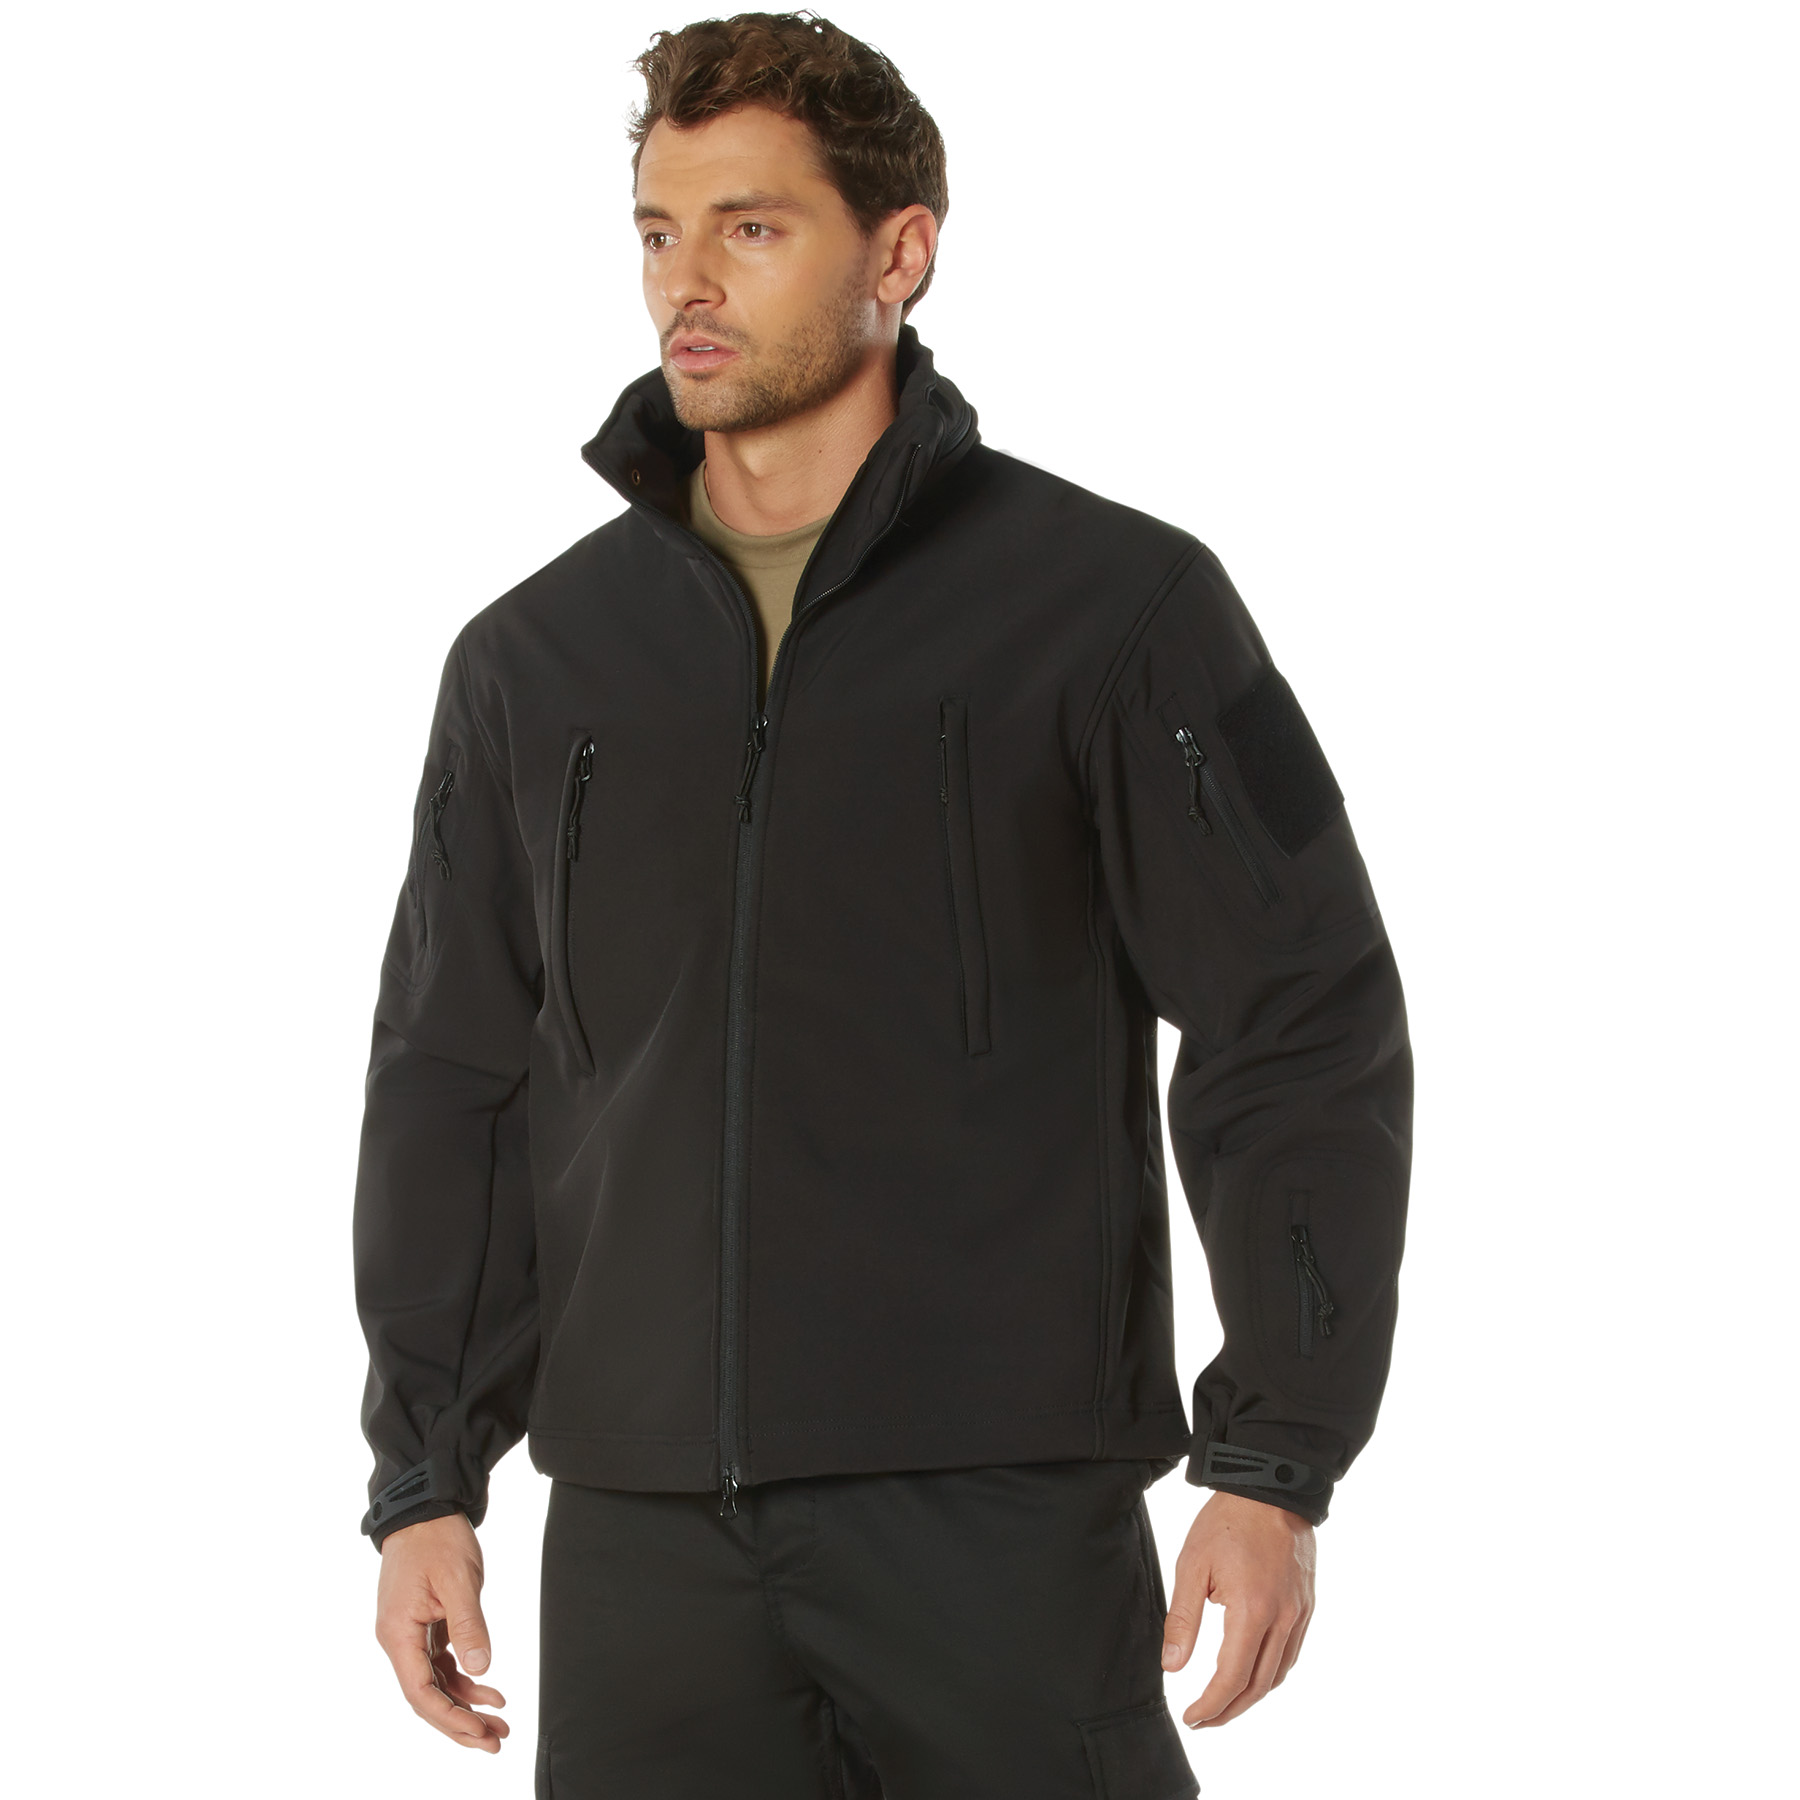 Concealed Carry Soft Shell Jacket from Rothco